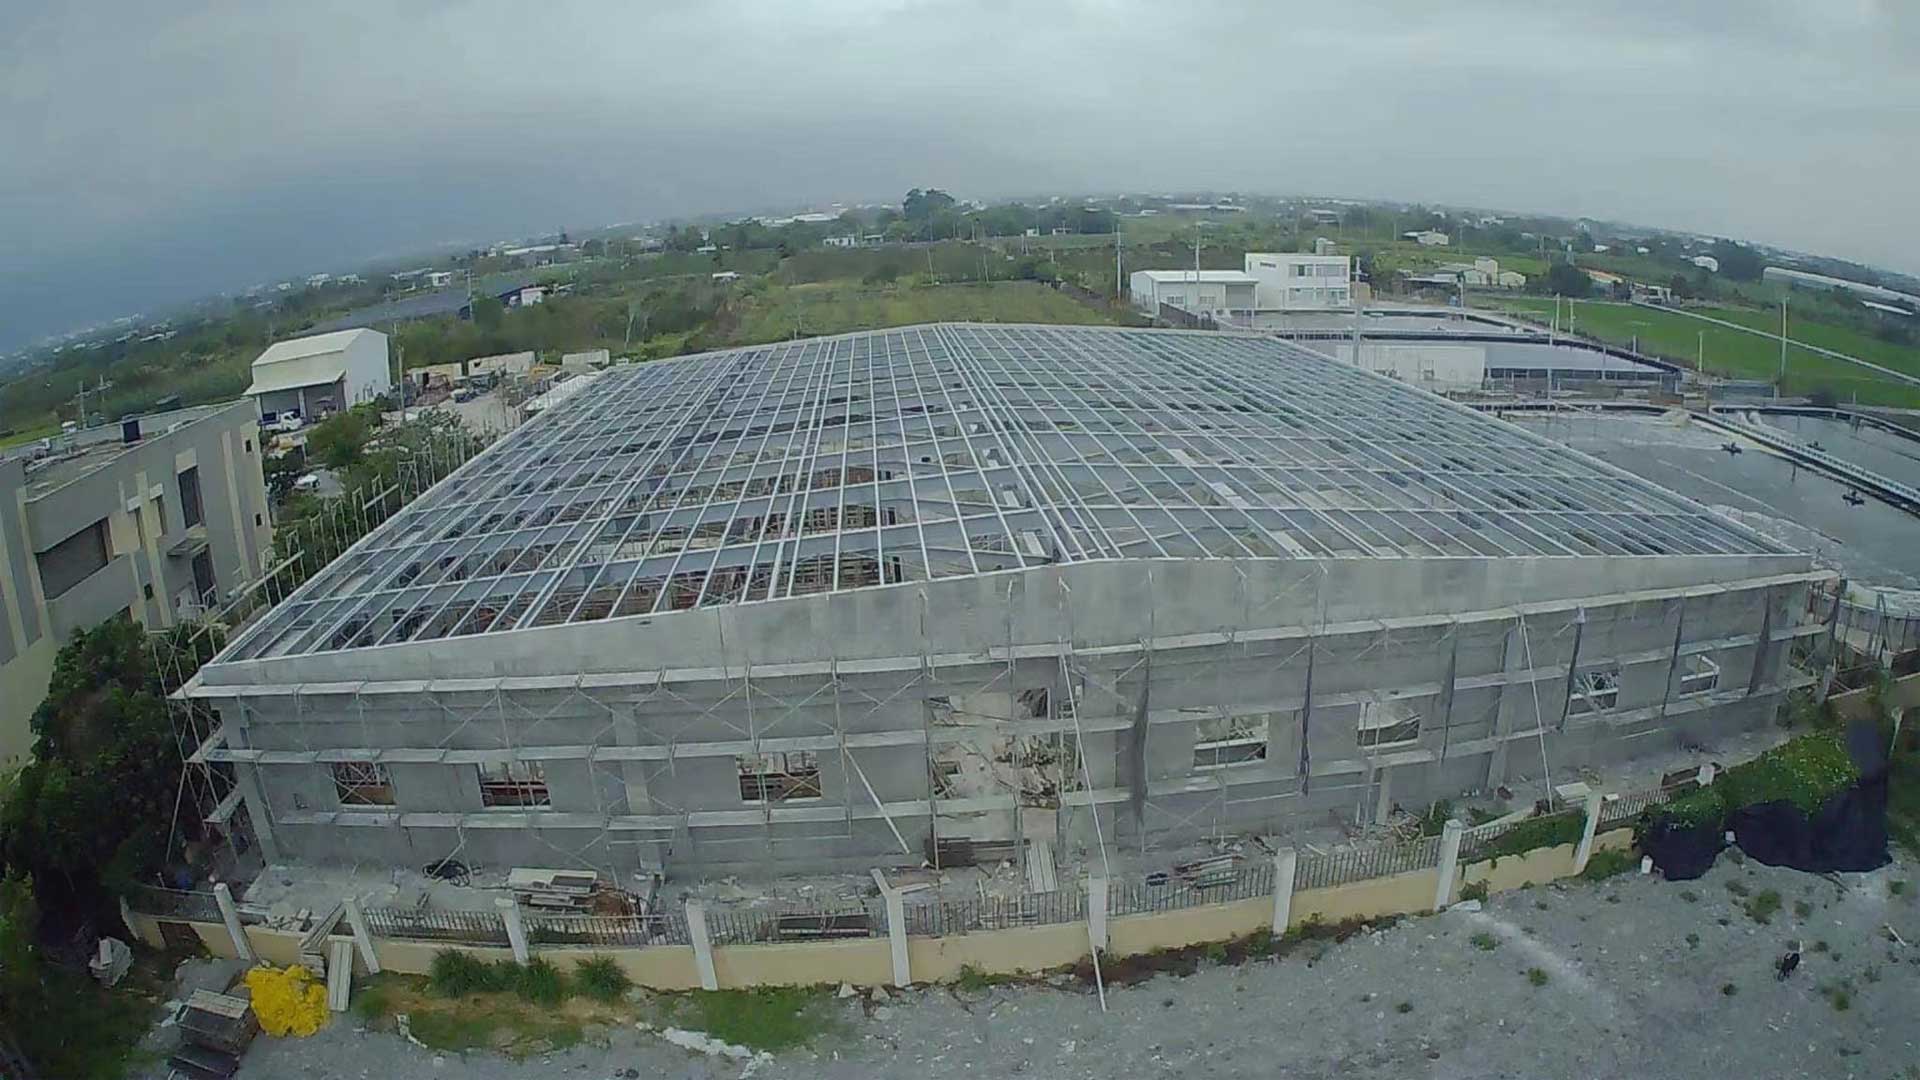 The indoor fishery electricity symbiosis solar project of Huge Energy